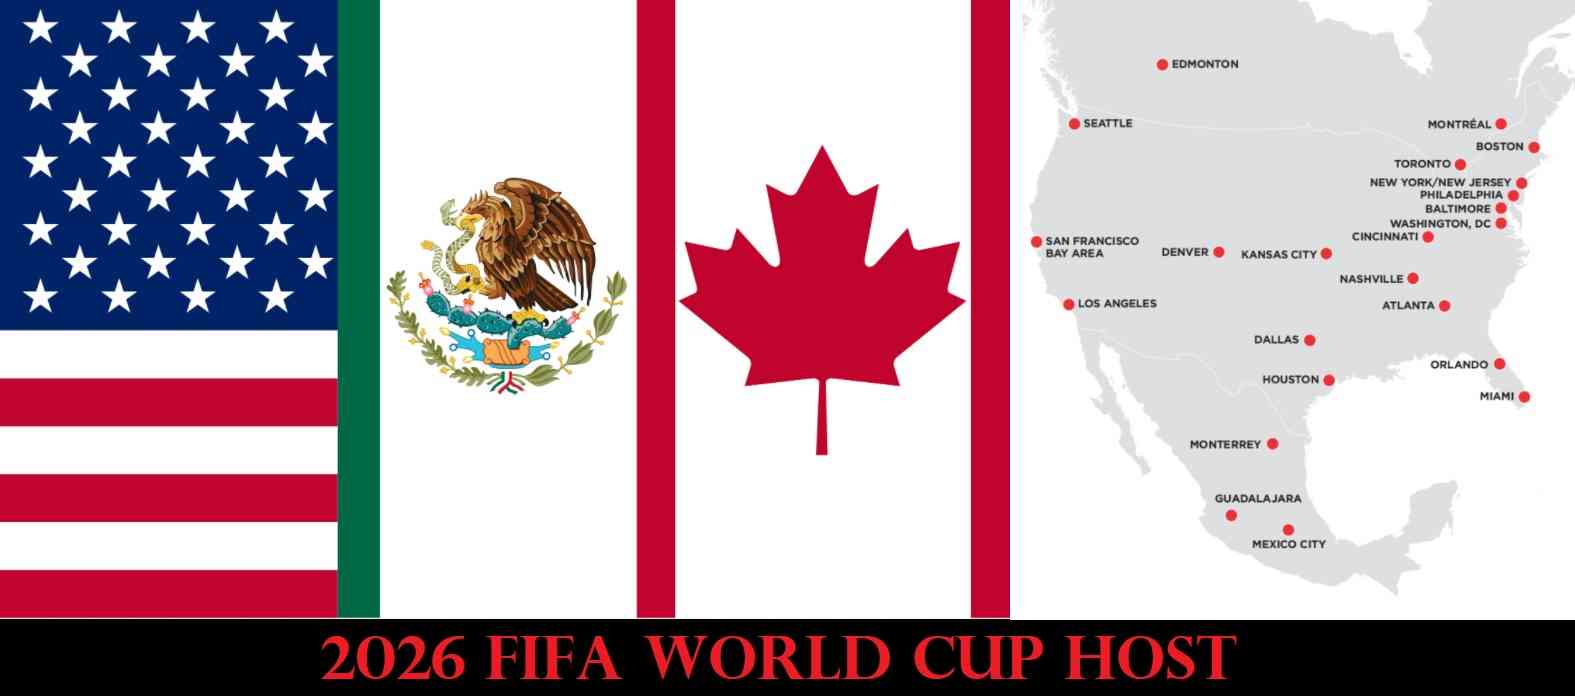 2026 FIFA World Cup Host Qualification and Venues